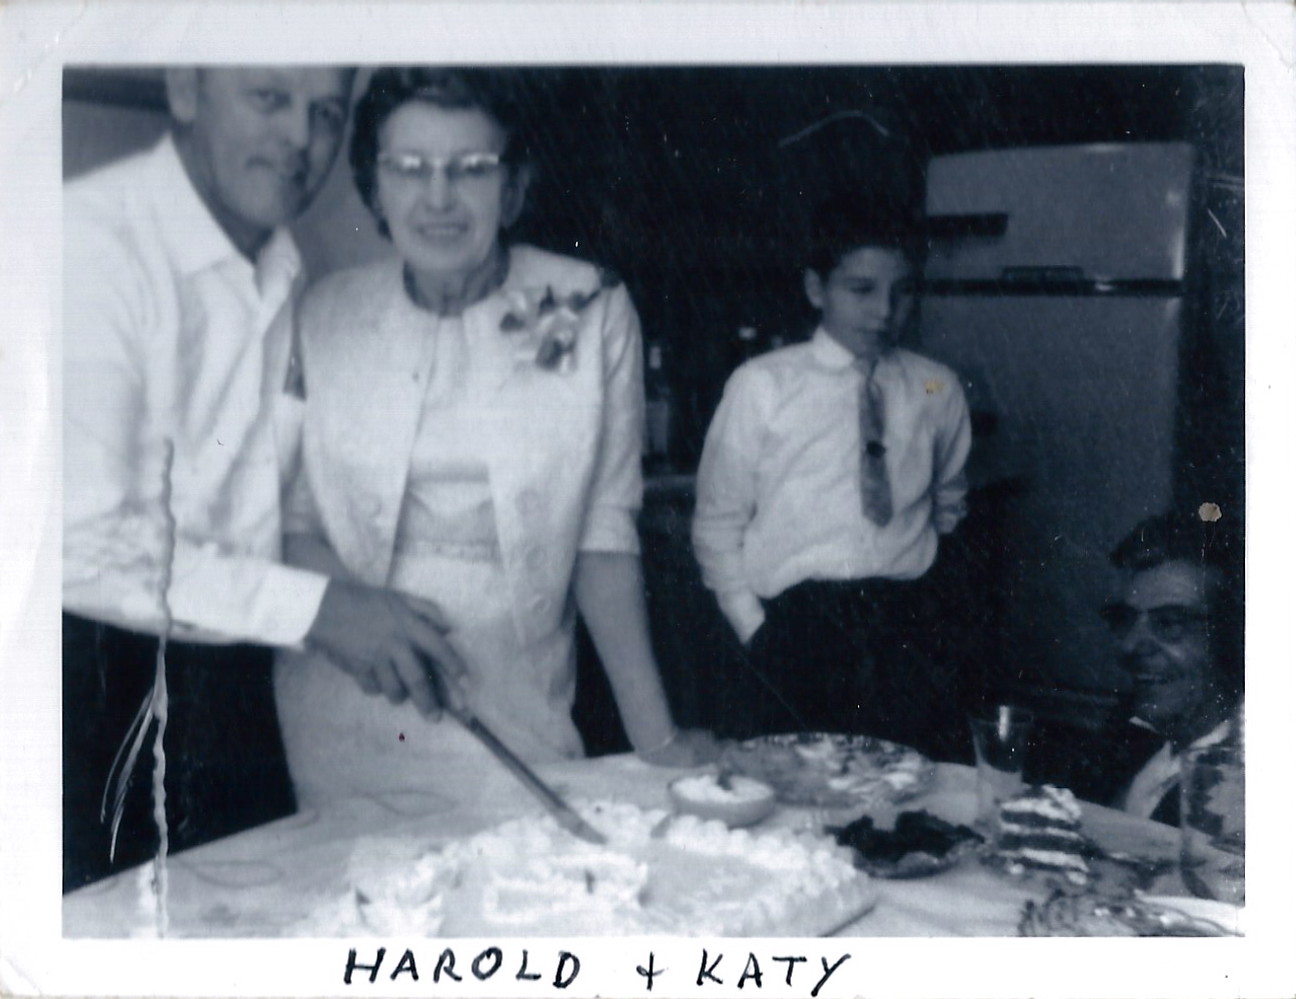 Harold and Katie Silker cutting their wedding cake with Darryl Boyd and Dante Dorato nearby